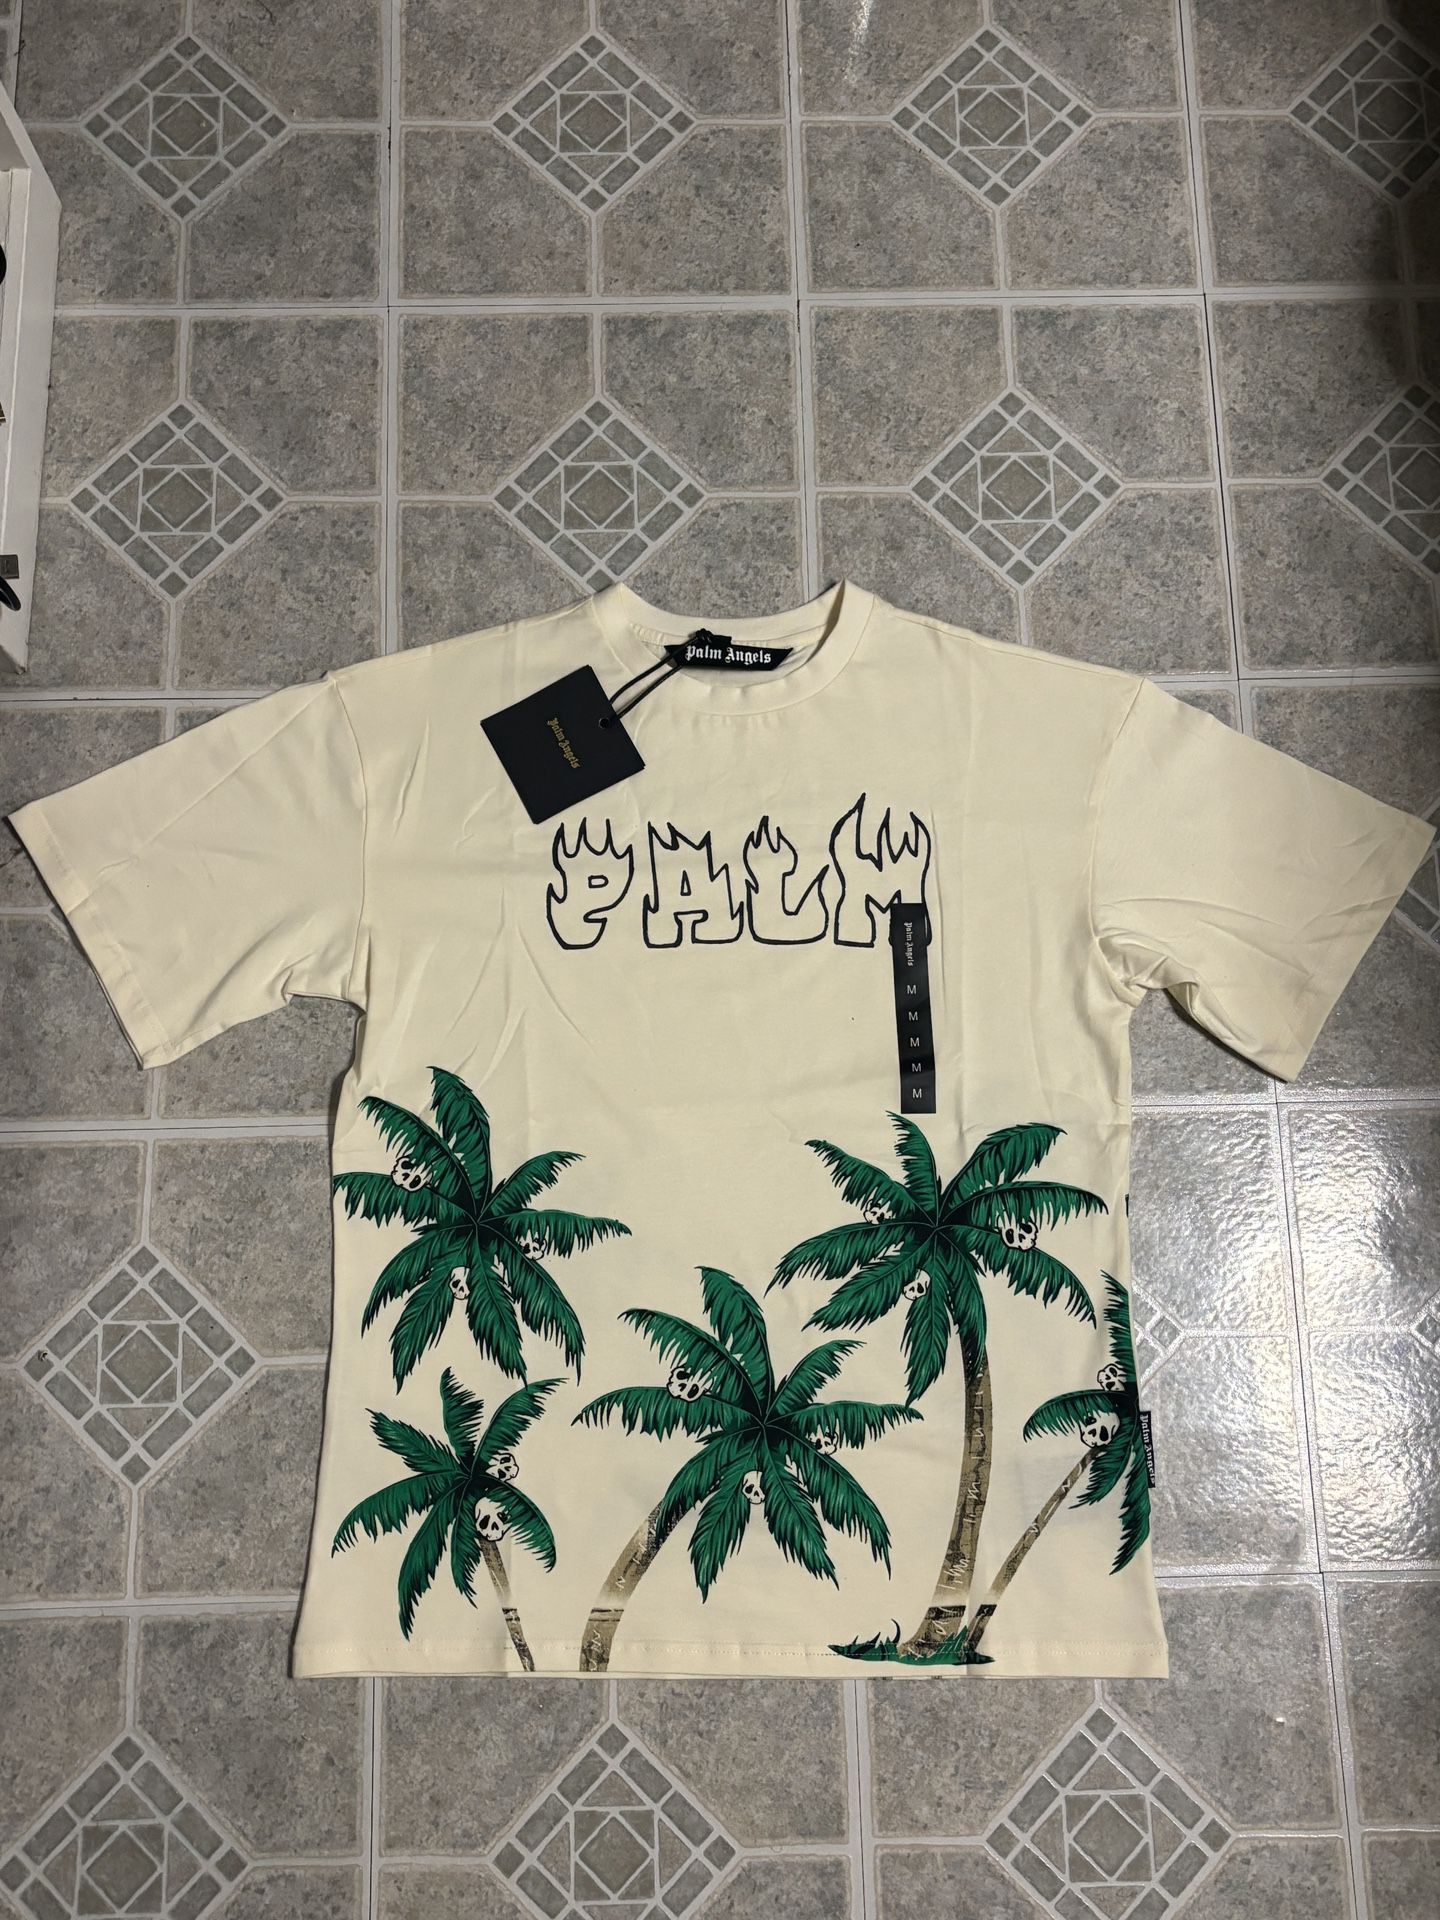 Palm Angles Shull Tee Size M (recipt Available)